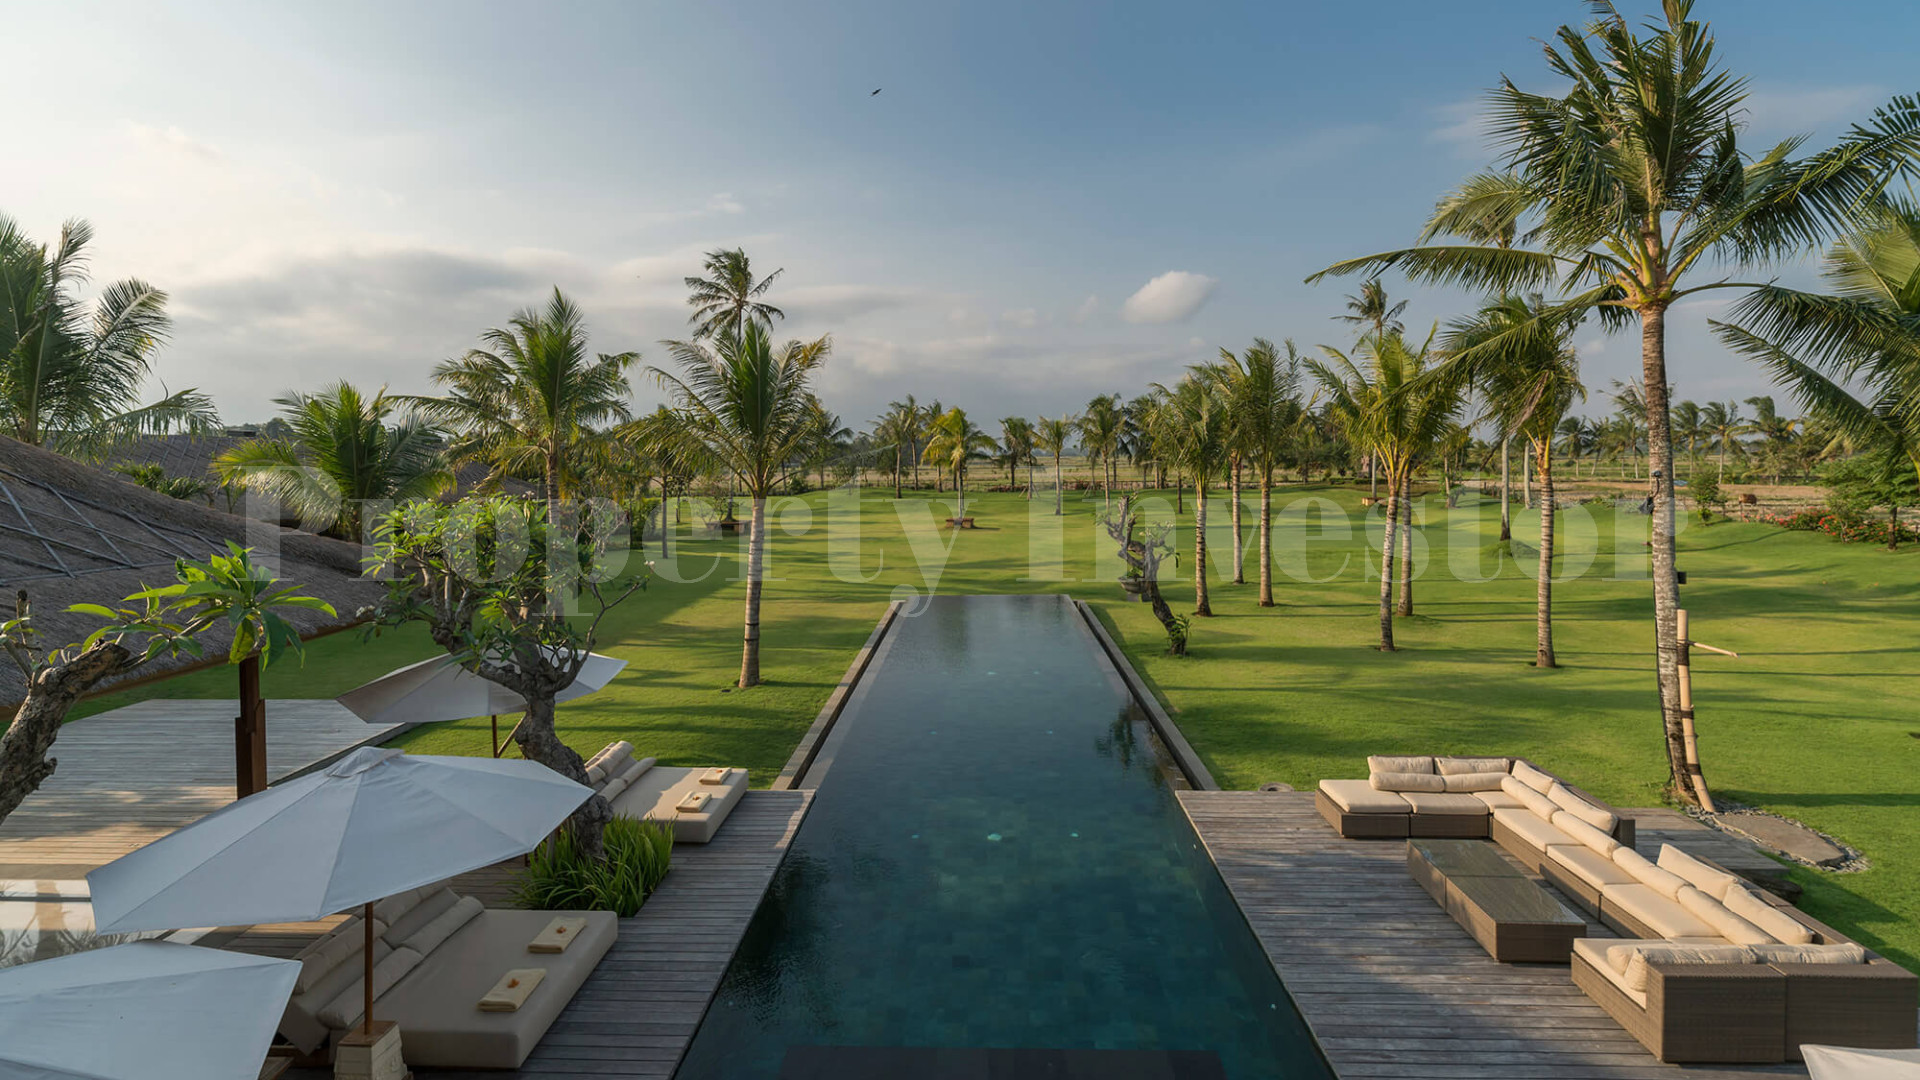 Exceptional 8 Bedroom Luxury Estate with Magnificent Landscaped Gardens for Sale in Tabanan, Bali